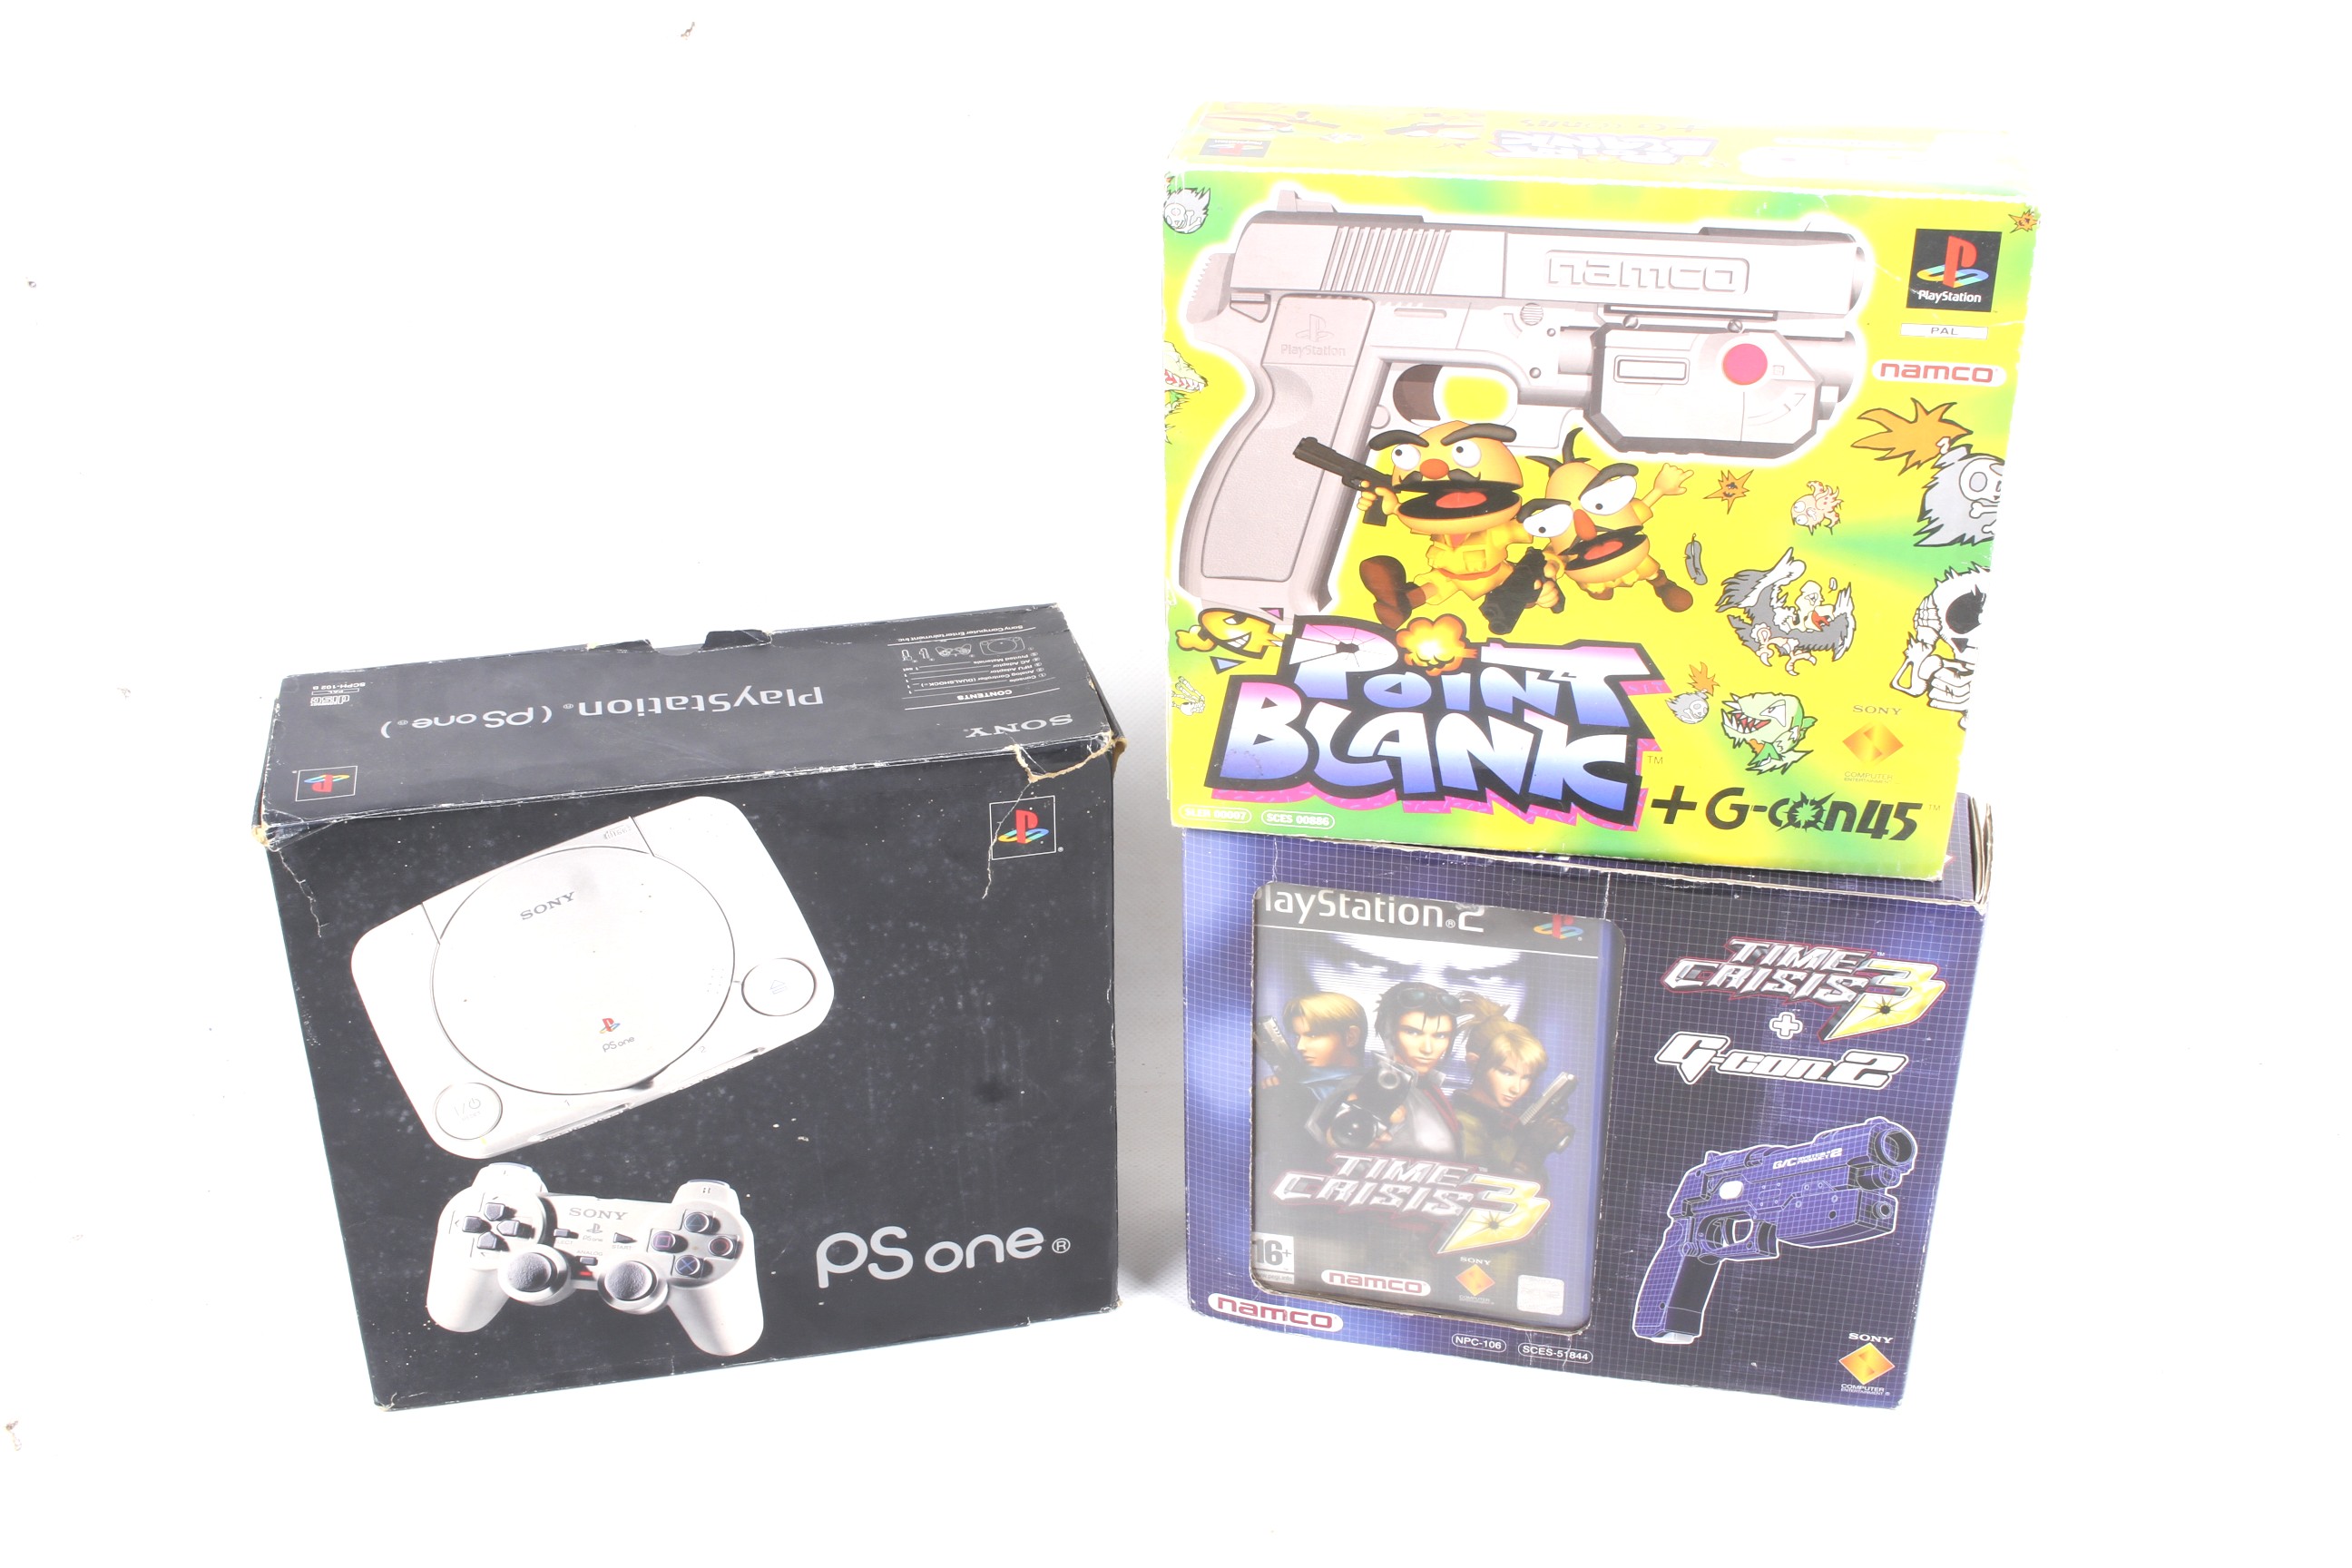 A Sony Playstation One games console and two games.